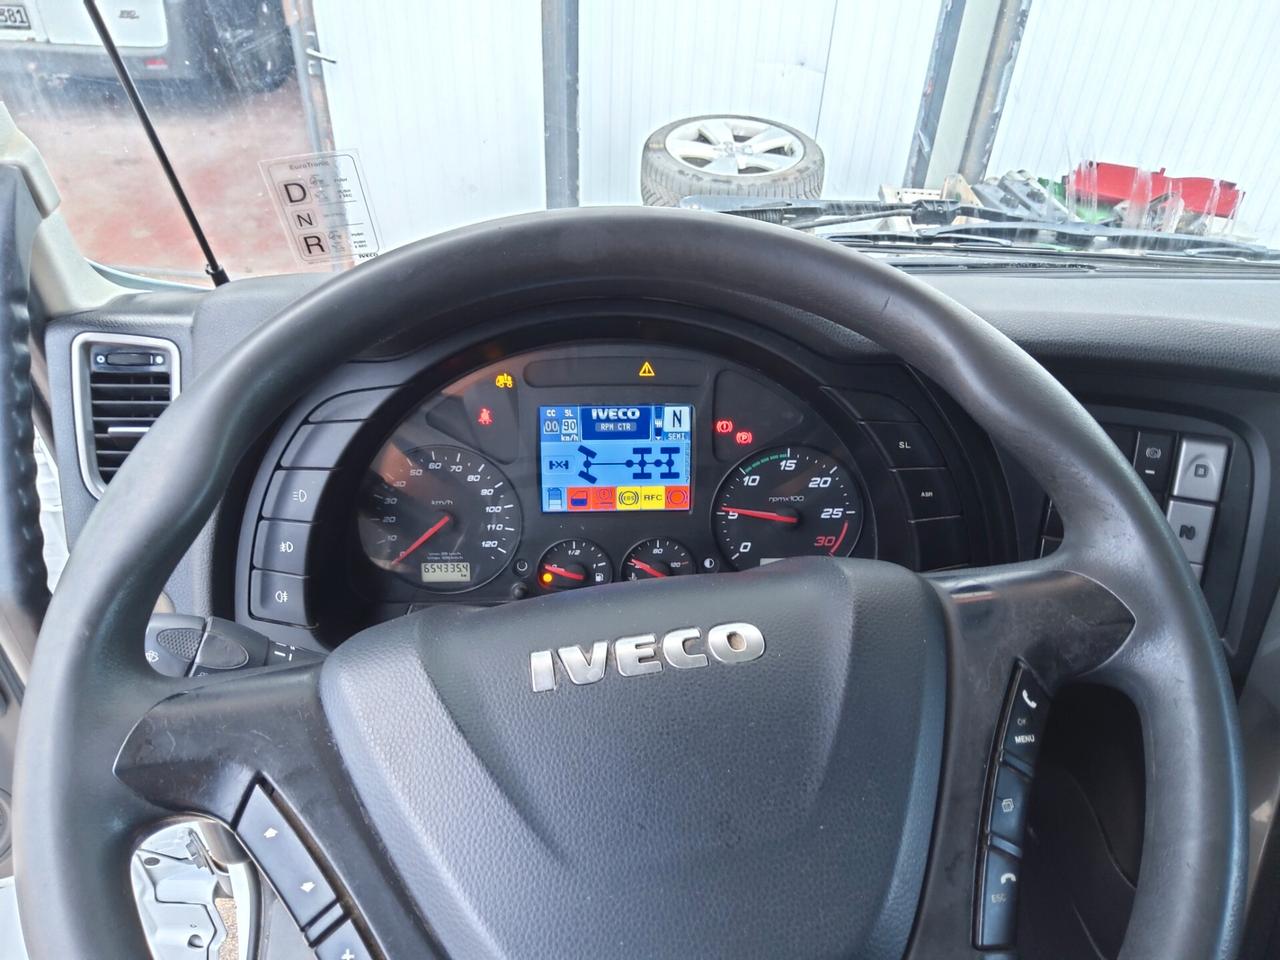 IVECO AS260S46 STRALIS (C14)